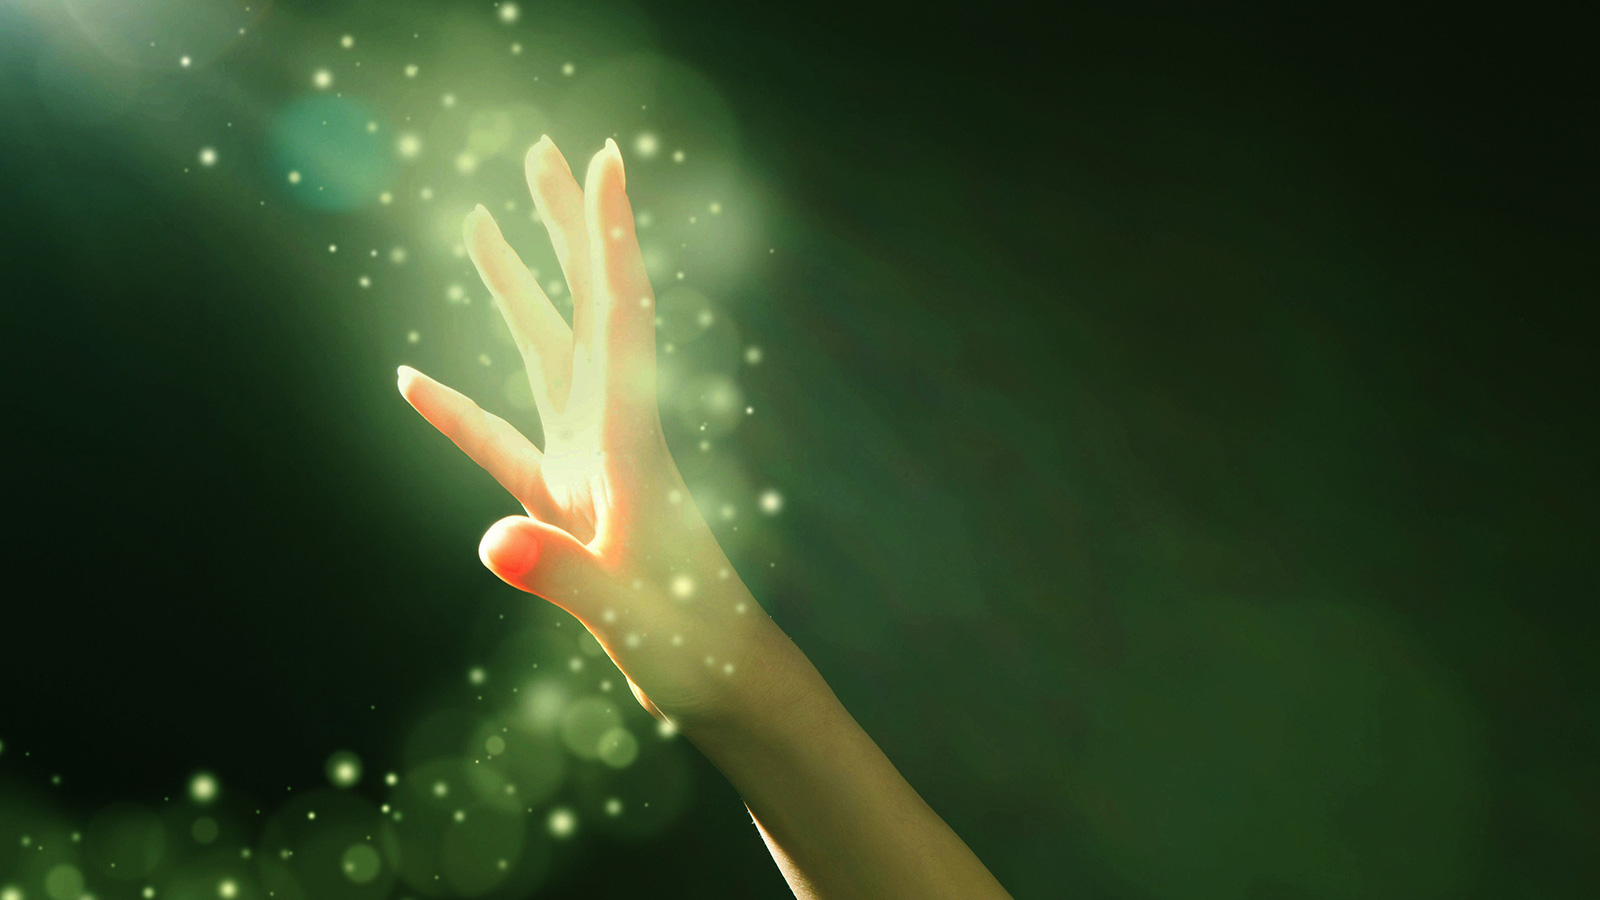 Magic particles with a hand